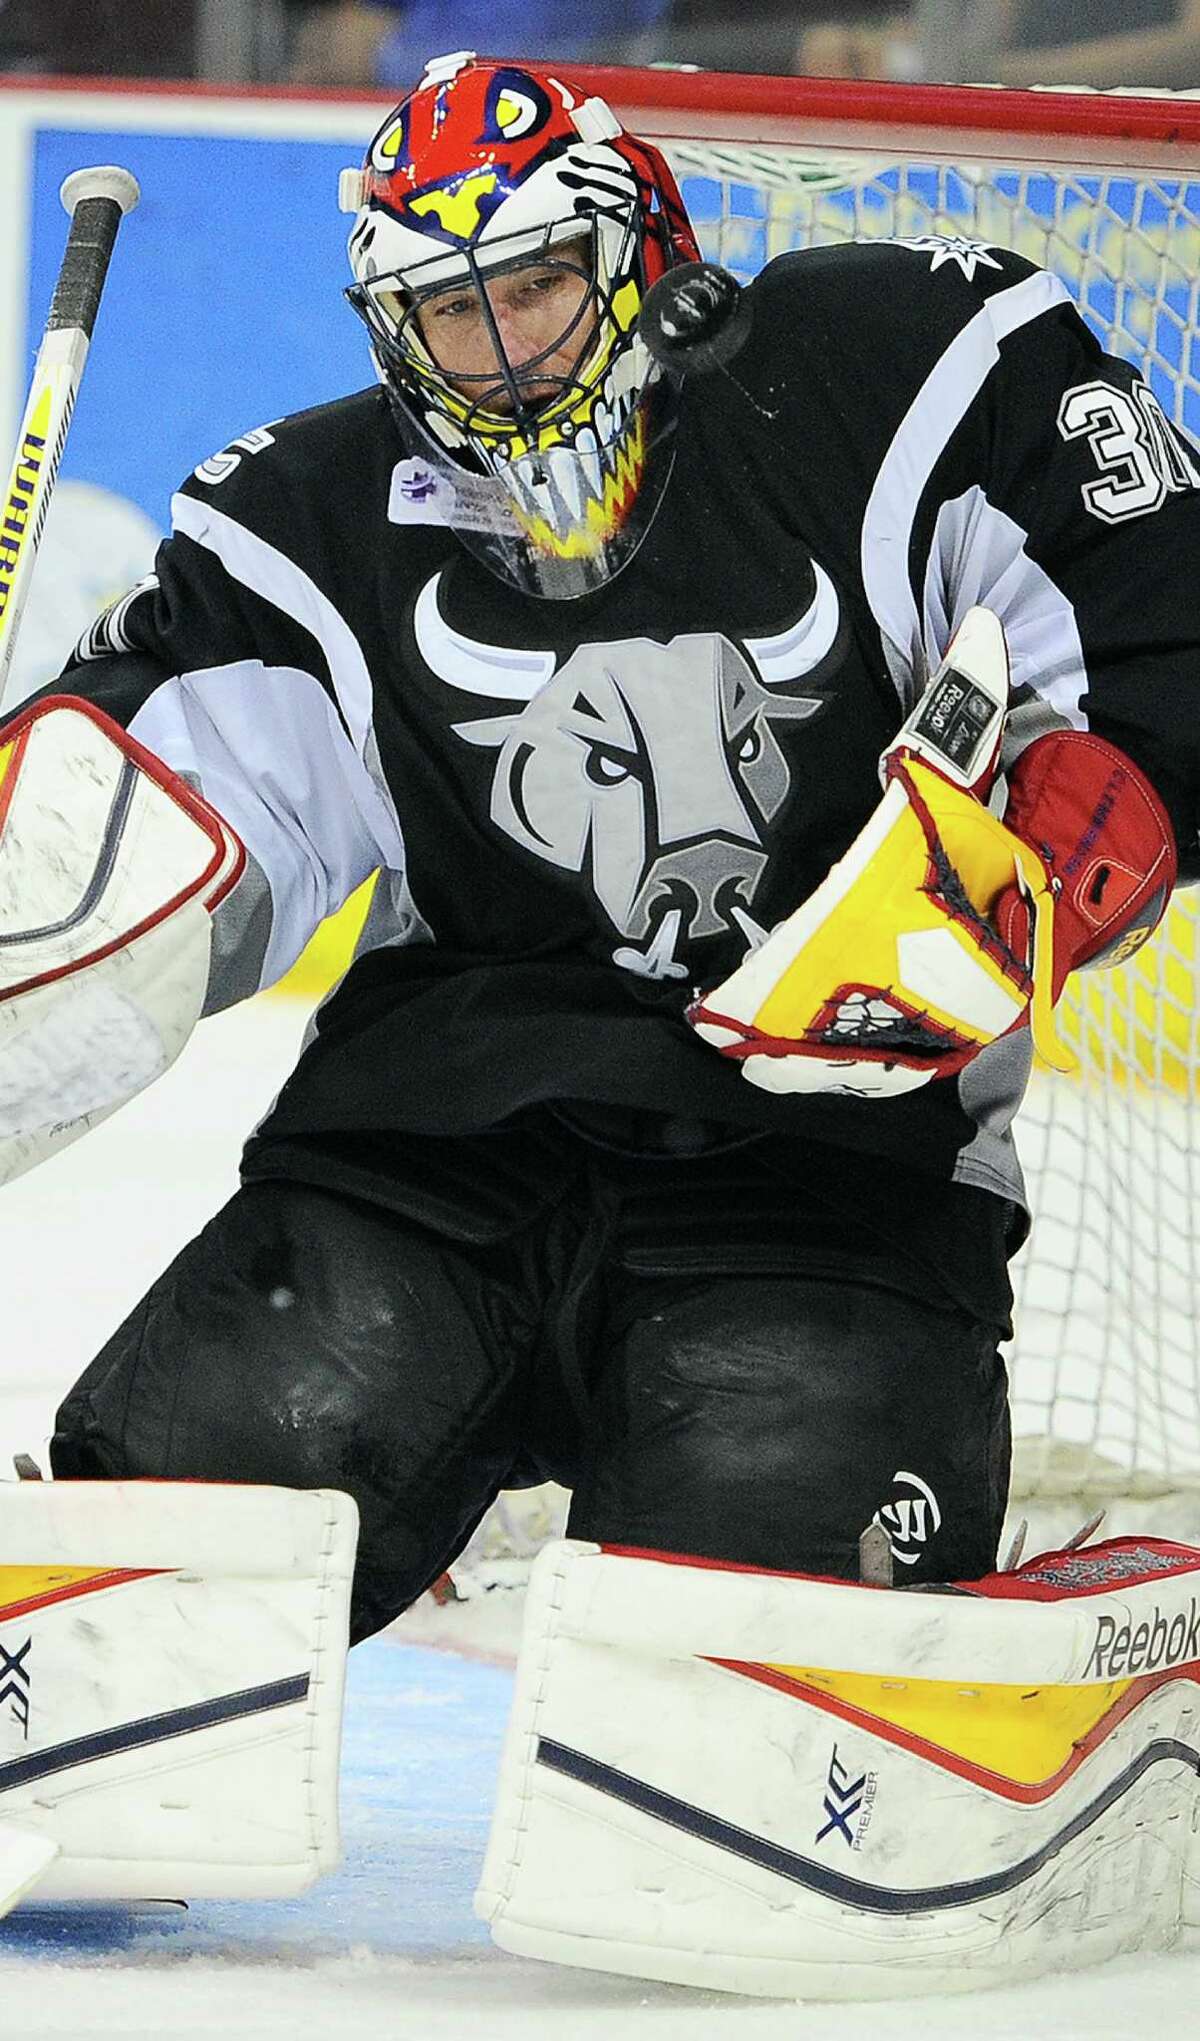 Rampage goaltender Scott Clemmensen makes a save during the overtime period against the Texas Stars. He had 40 saves in the game.